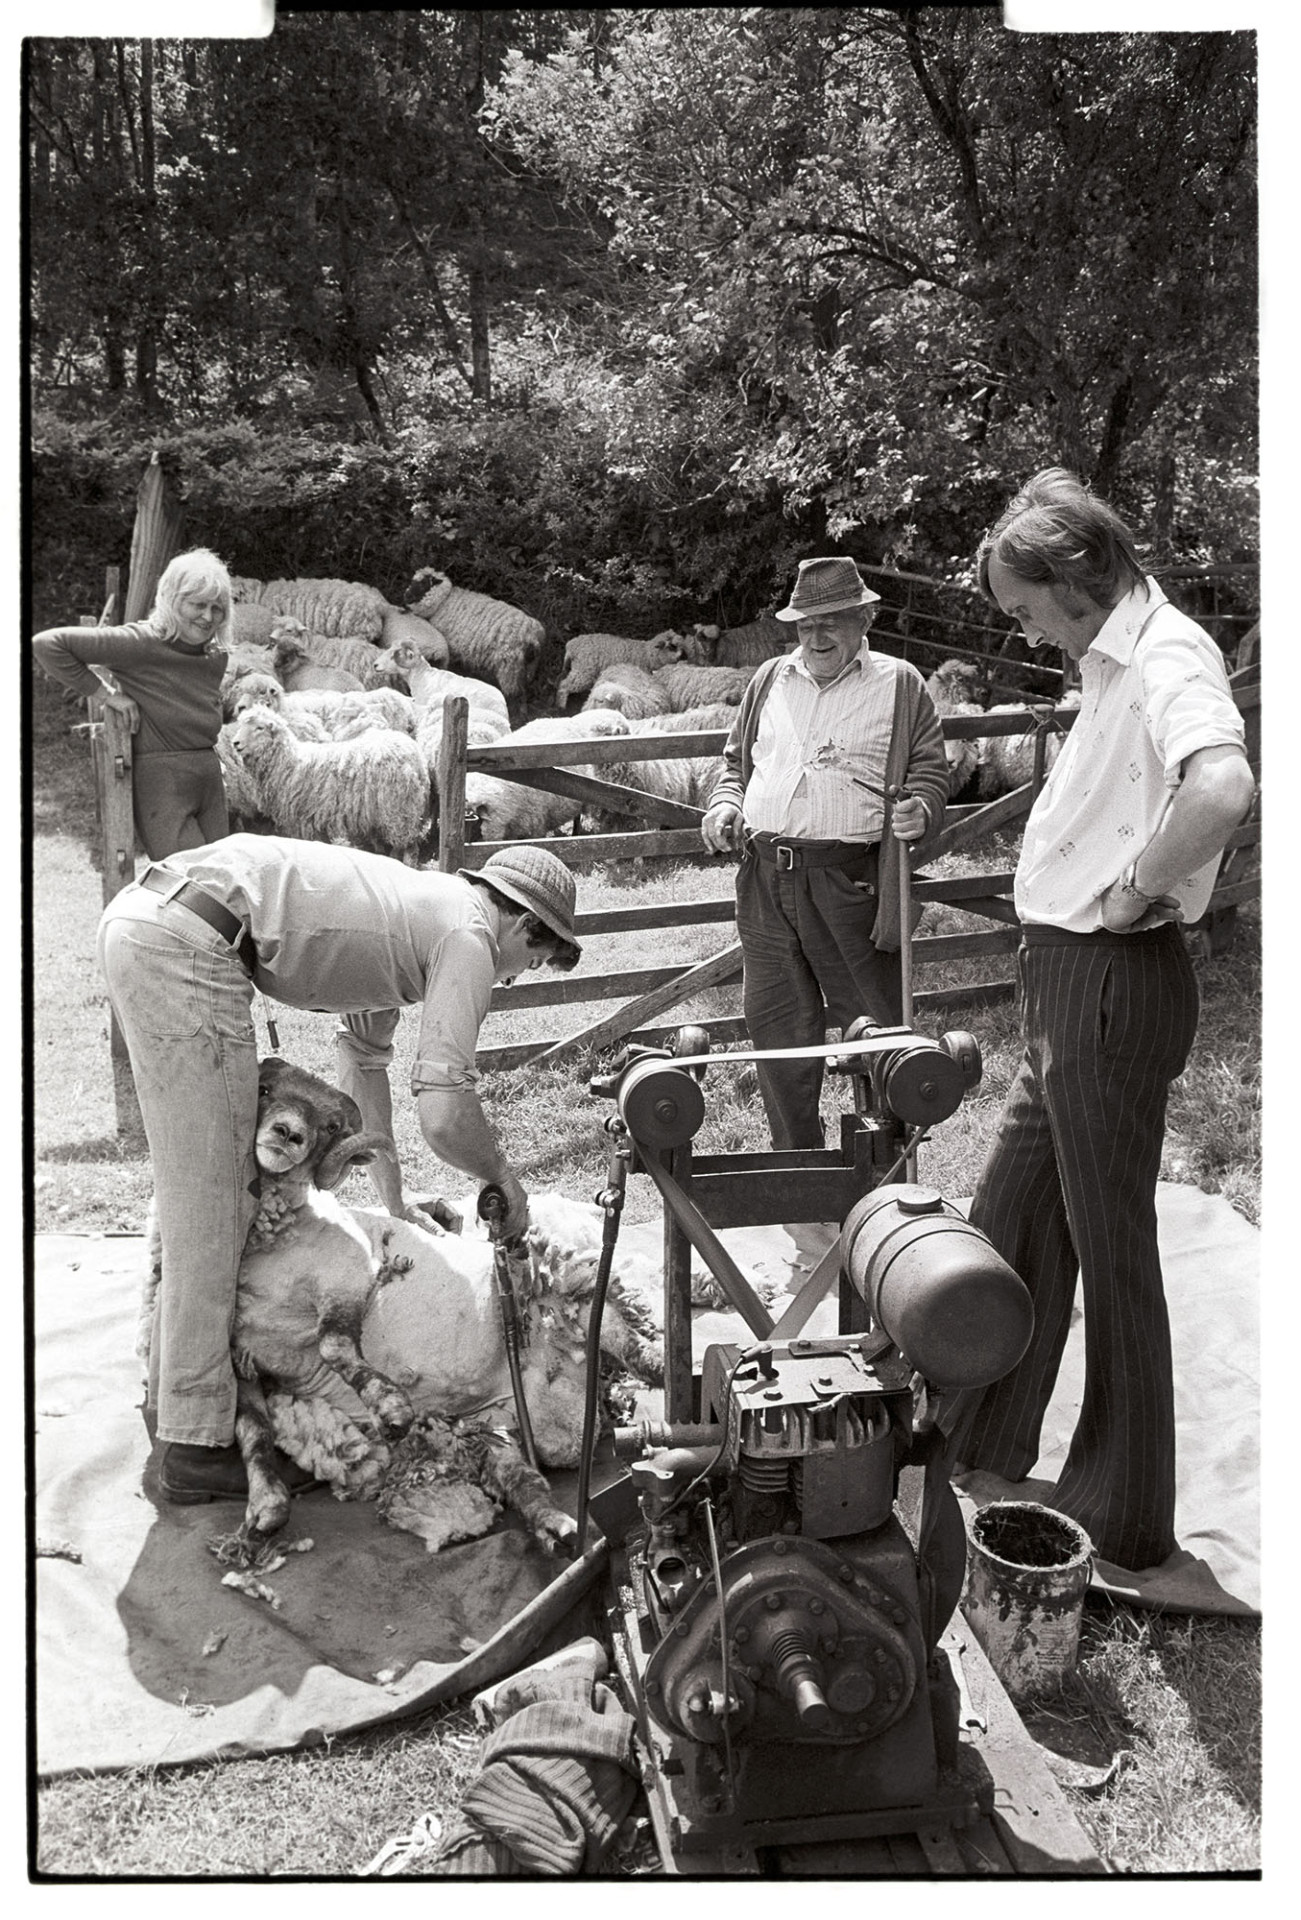 Sheep shearing with small diesel clippers.
[Stephen Squire shearing a sheep at Addisford, Dolton with clippers running off a small diesel engine. Jo Curzon, Archie Parkhouse and another man are watching and sheep are waiting in a pen in the background.]